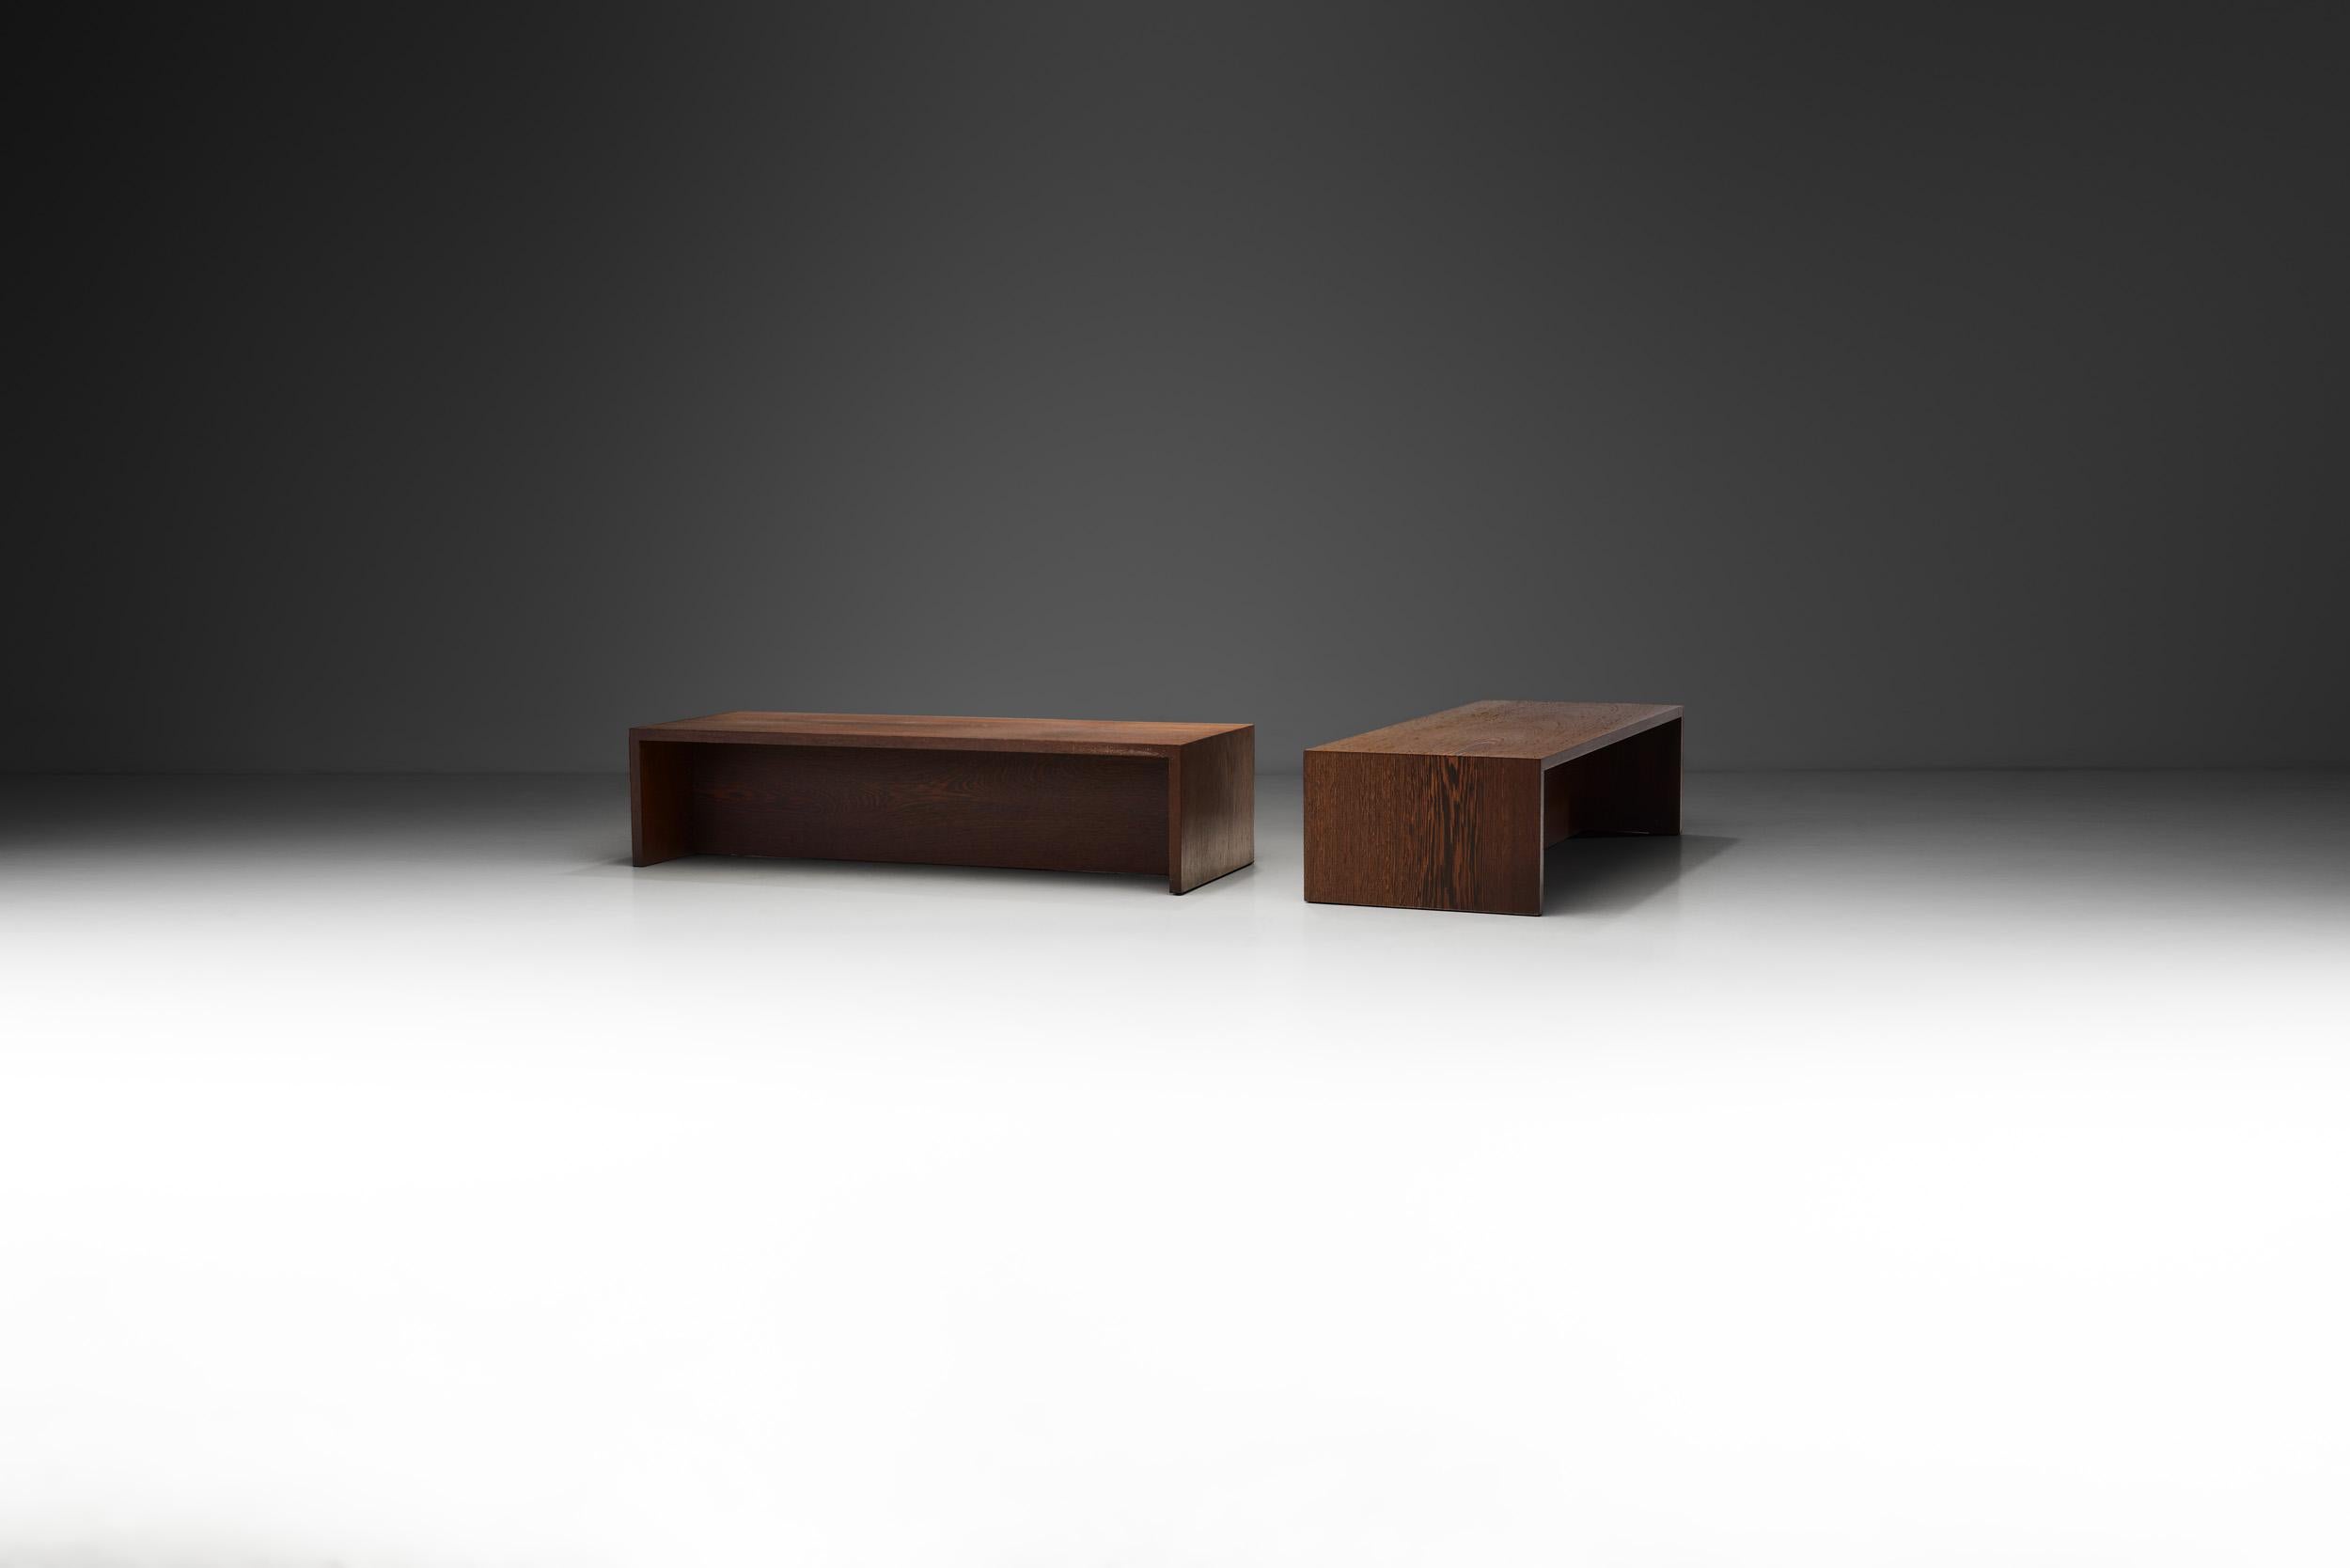 Wood Minimalist Dutch Wenge Benches, Netherlands, Ca 1970s For Sale